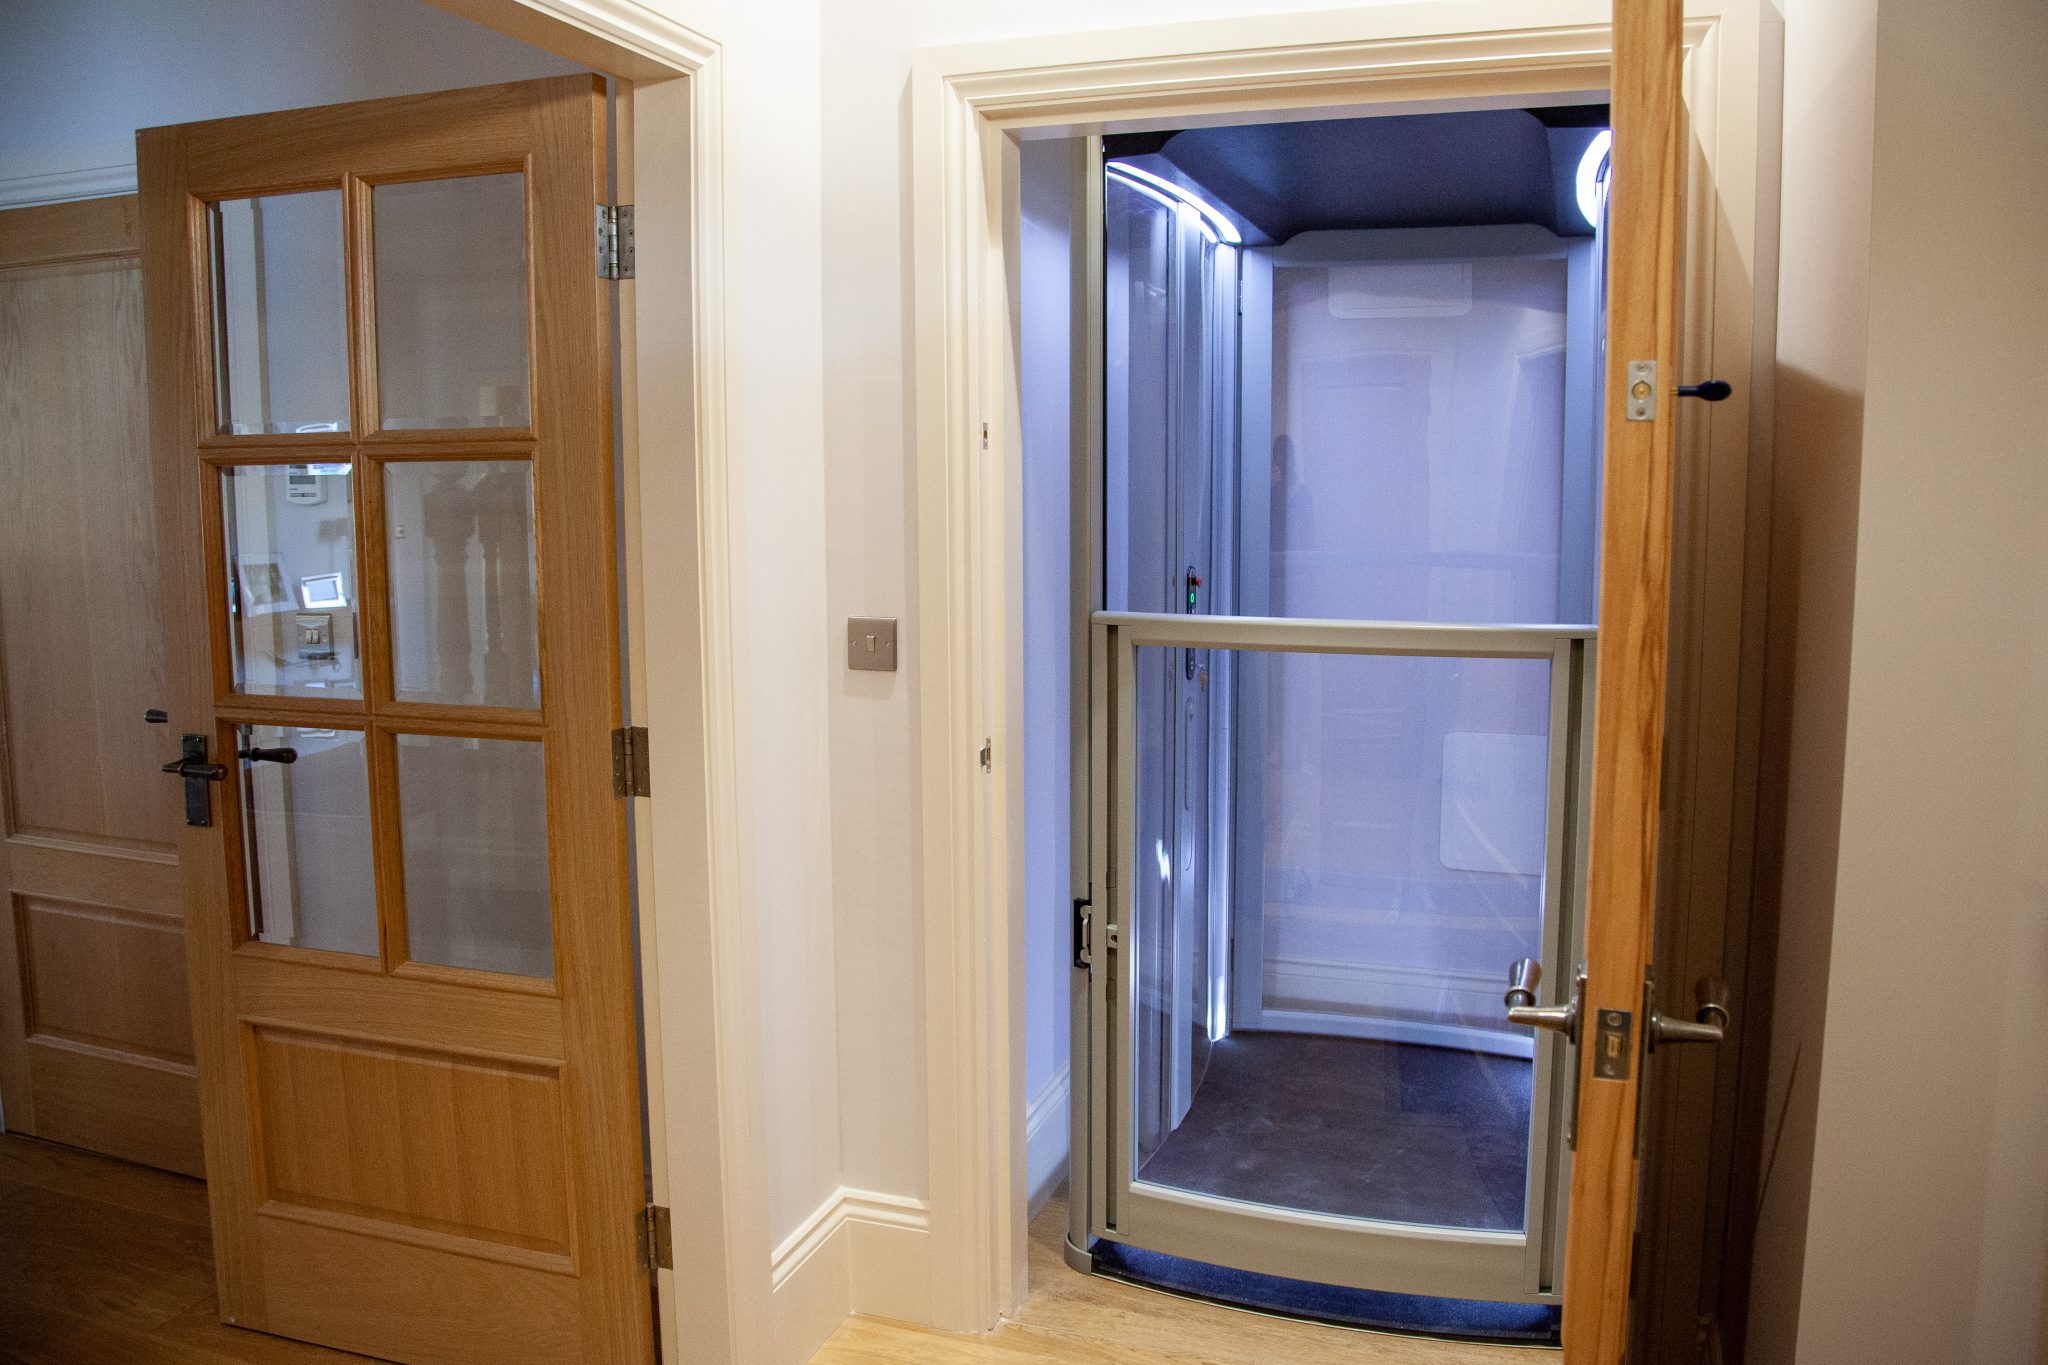 LIZ CAN STAY IN ‘DREAM HOME’ THANKS  TO A STILTZ HOMELIFT IN THE CUPBOARD @StiltzLifts